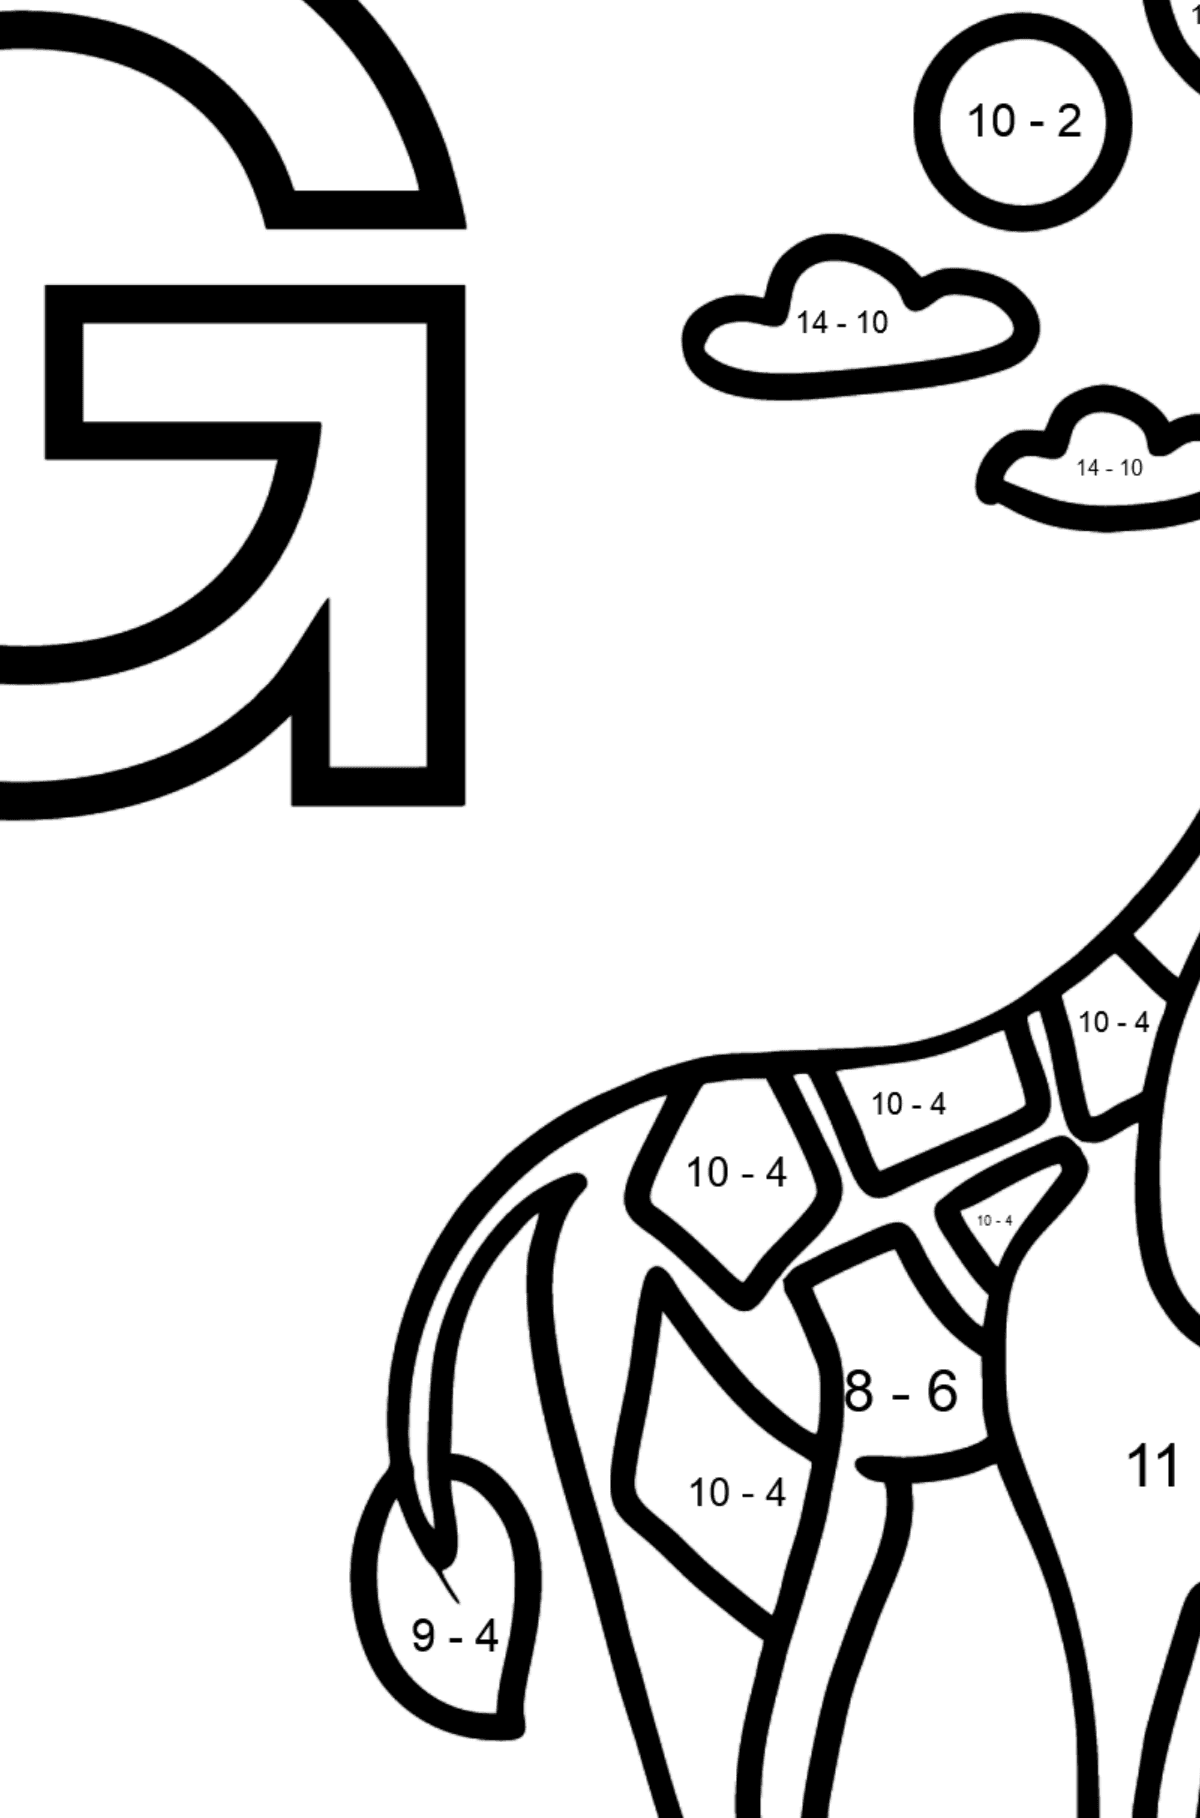 Portuguese Letter G coloring pages - GIRAFA - Math Coloring - Subtraction for Kids